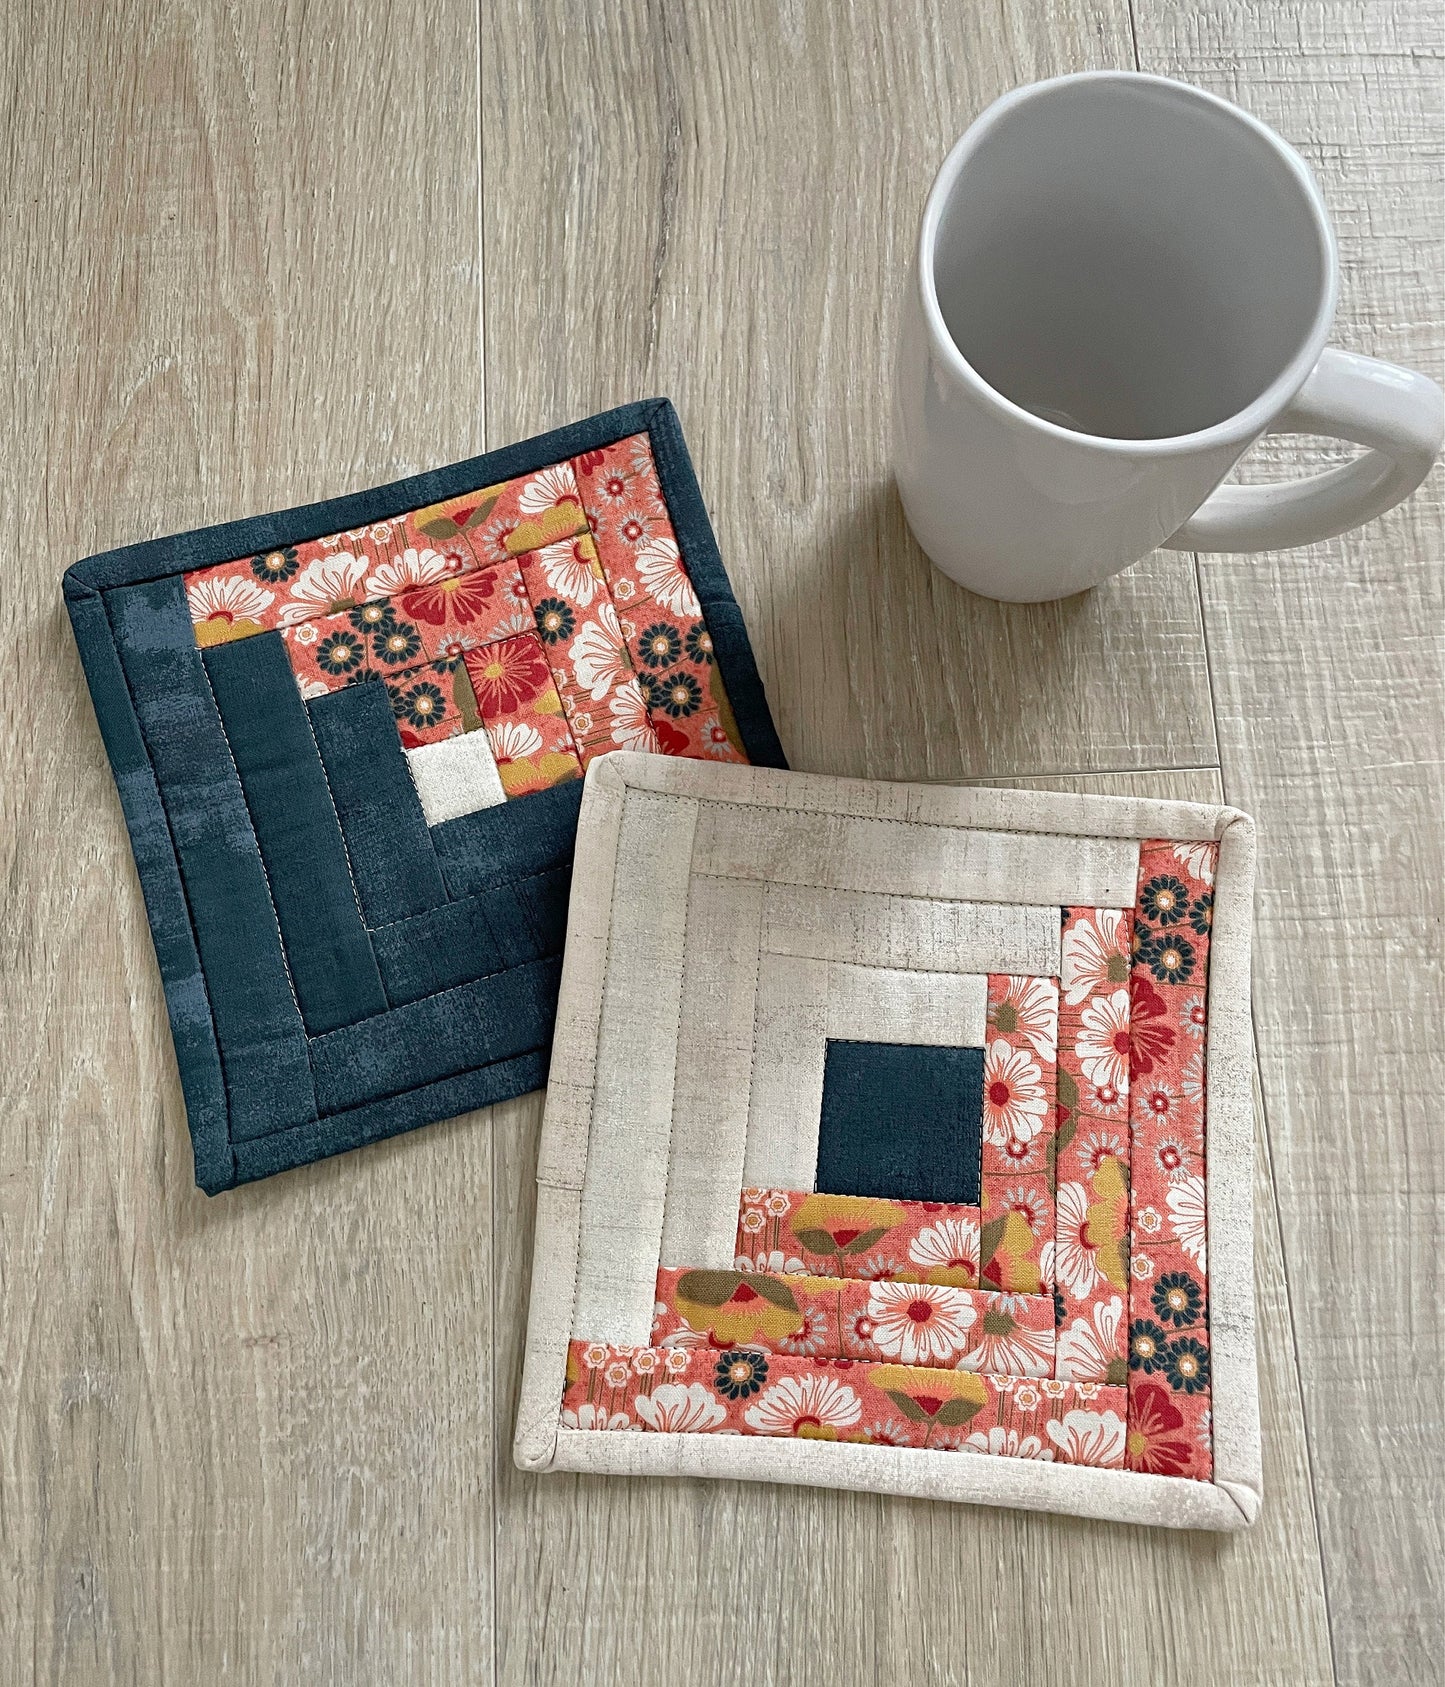 Handmade Quilted Fall/Autumn Coasters